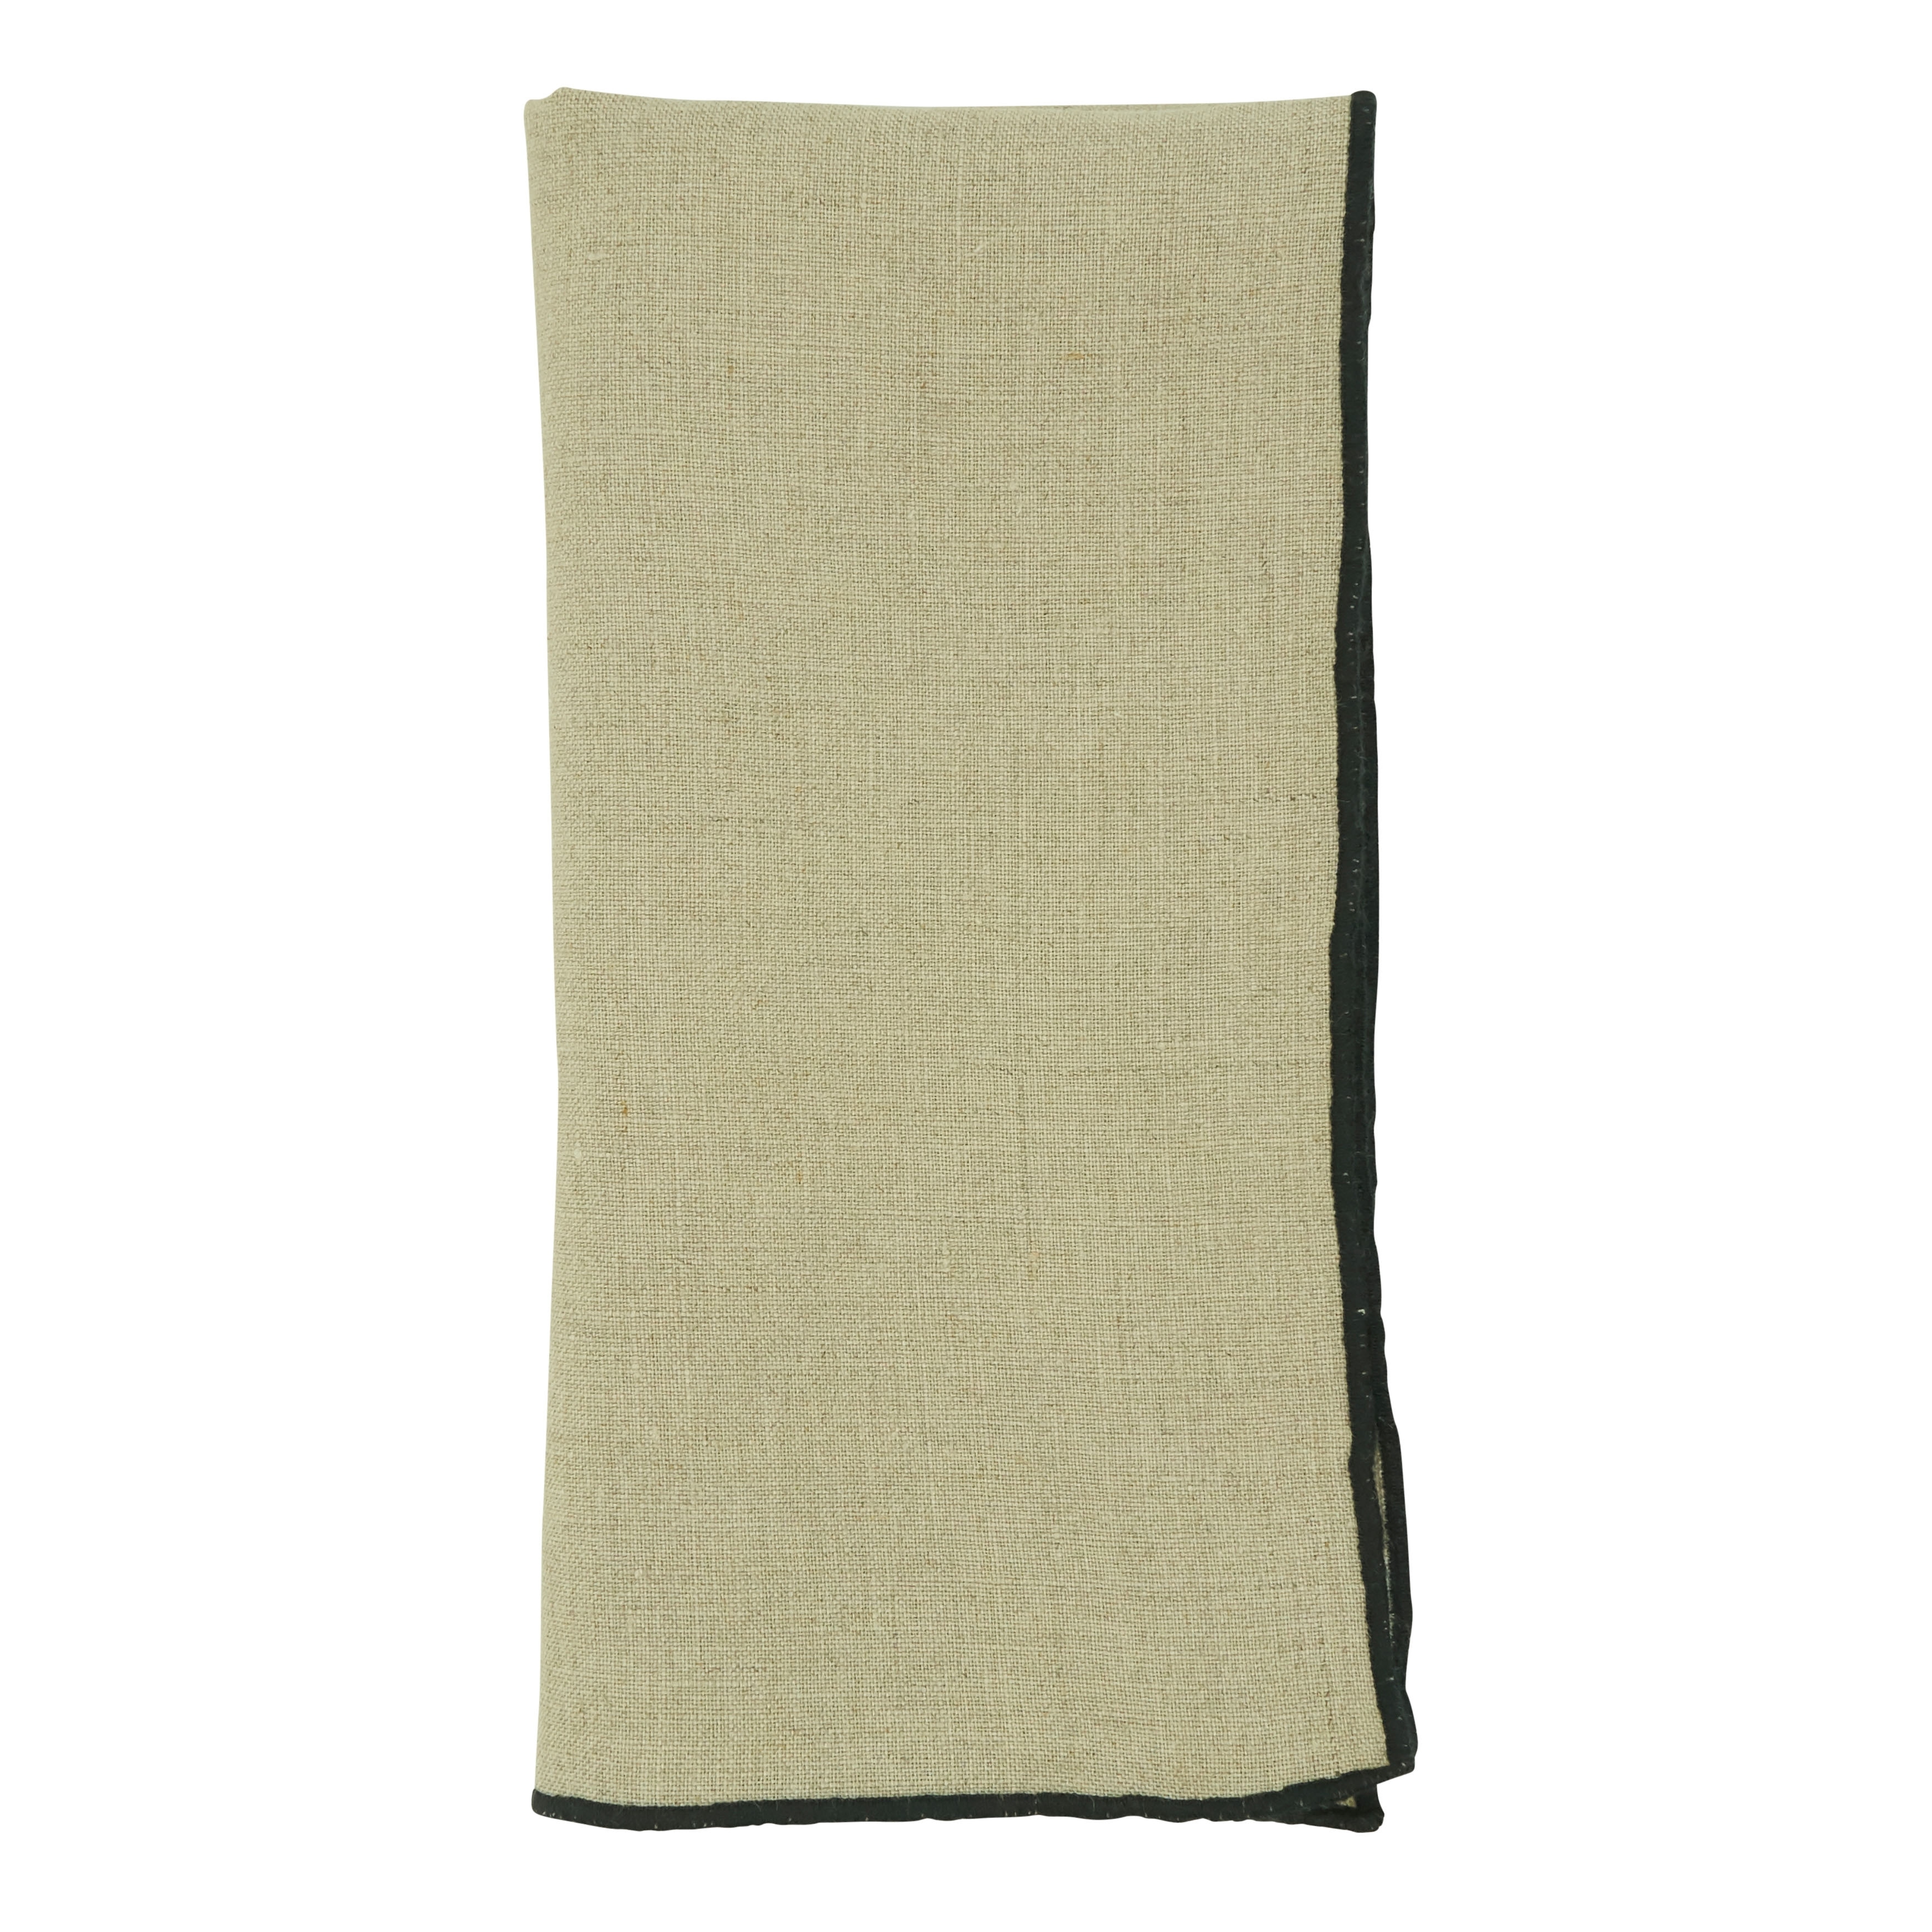 https://ak1.ostkcdn.com/images/products/is/images/direct/b04a3577fe6a1fdef88e309c0aa132102fa46b0b/Stonewashed-Linen-Napkins-With-Stitched-Border-Design-%28Set-of-4%29.jpg